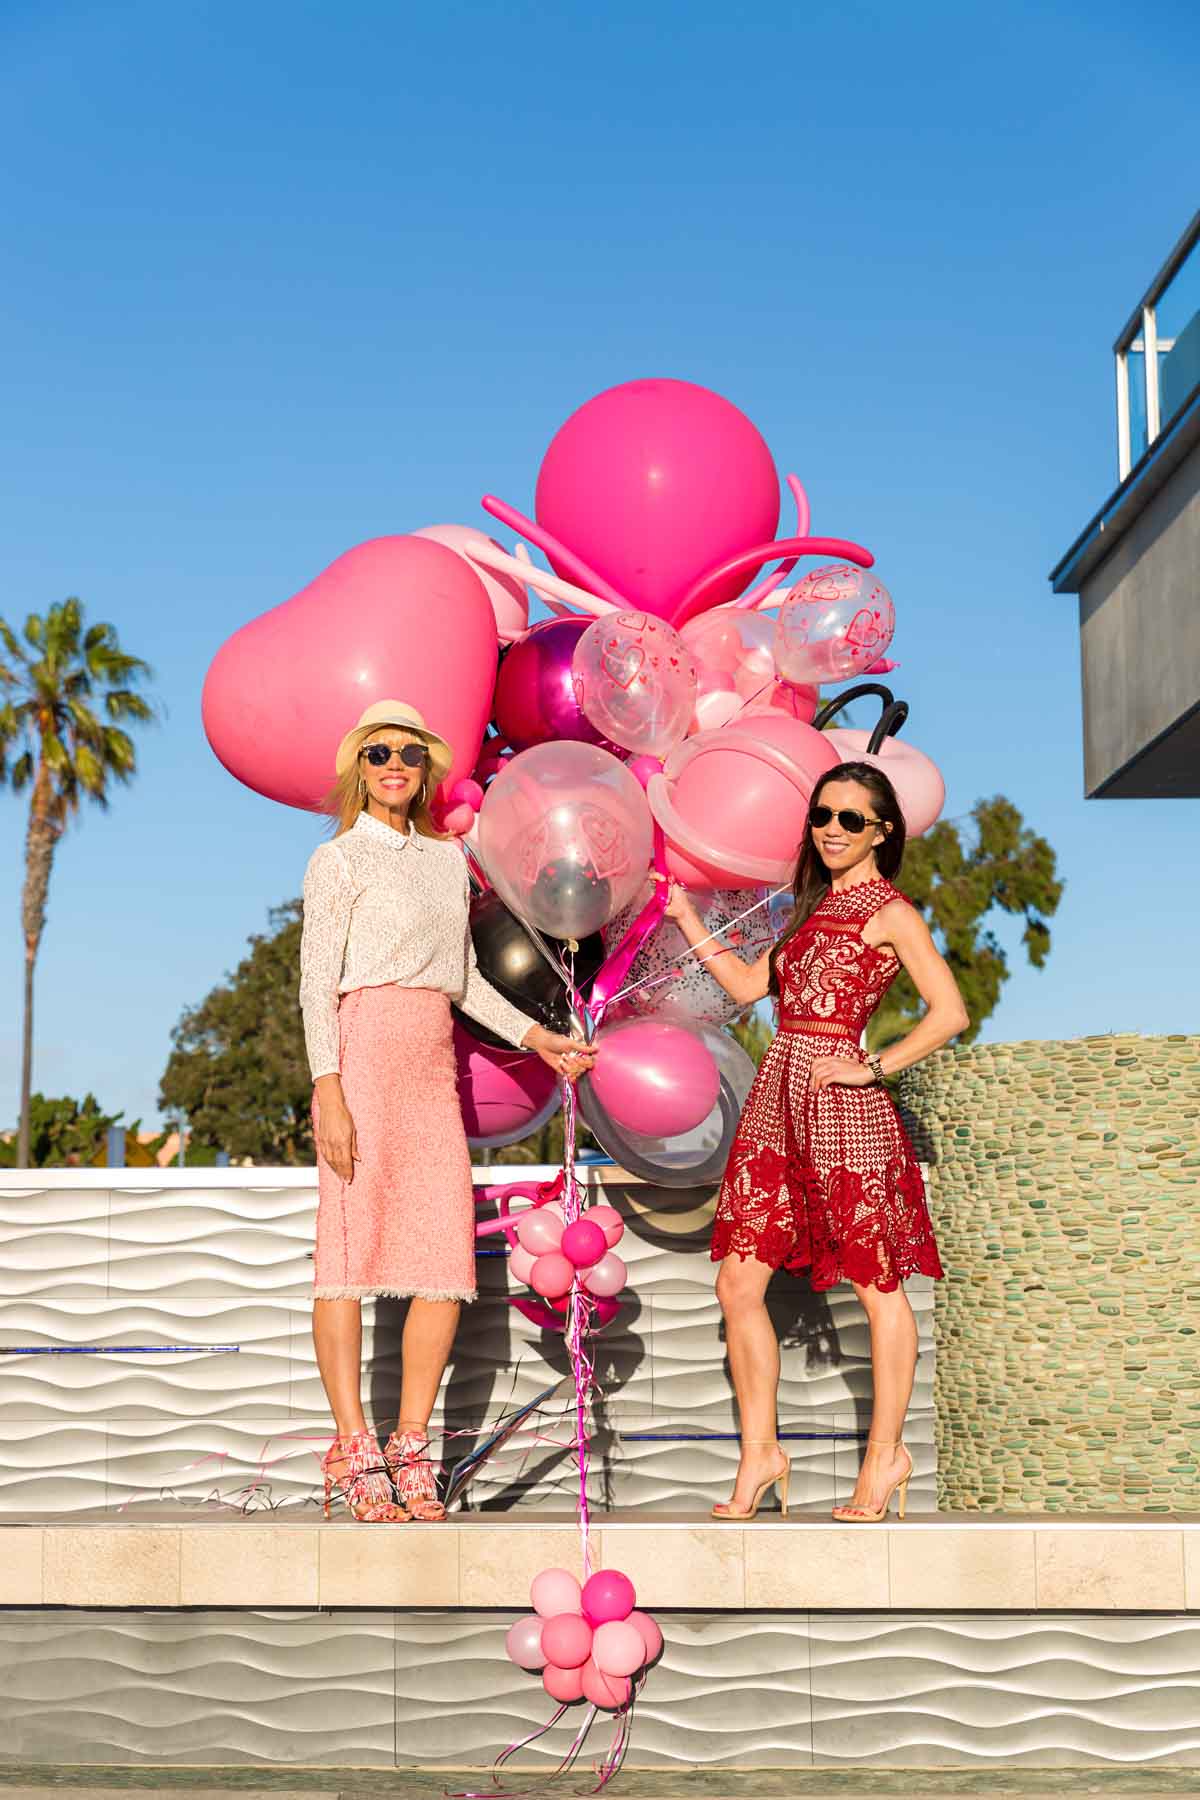 Shade Hotel Redondo Beach Review | The Style Collective | Valentine's Day Event Balloon Celebrations | Dermalogica | 'Lette Macarons CORE 